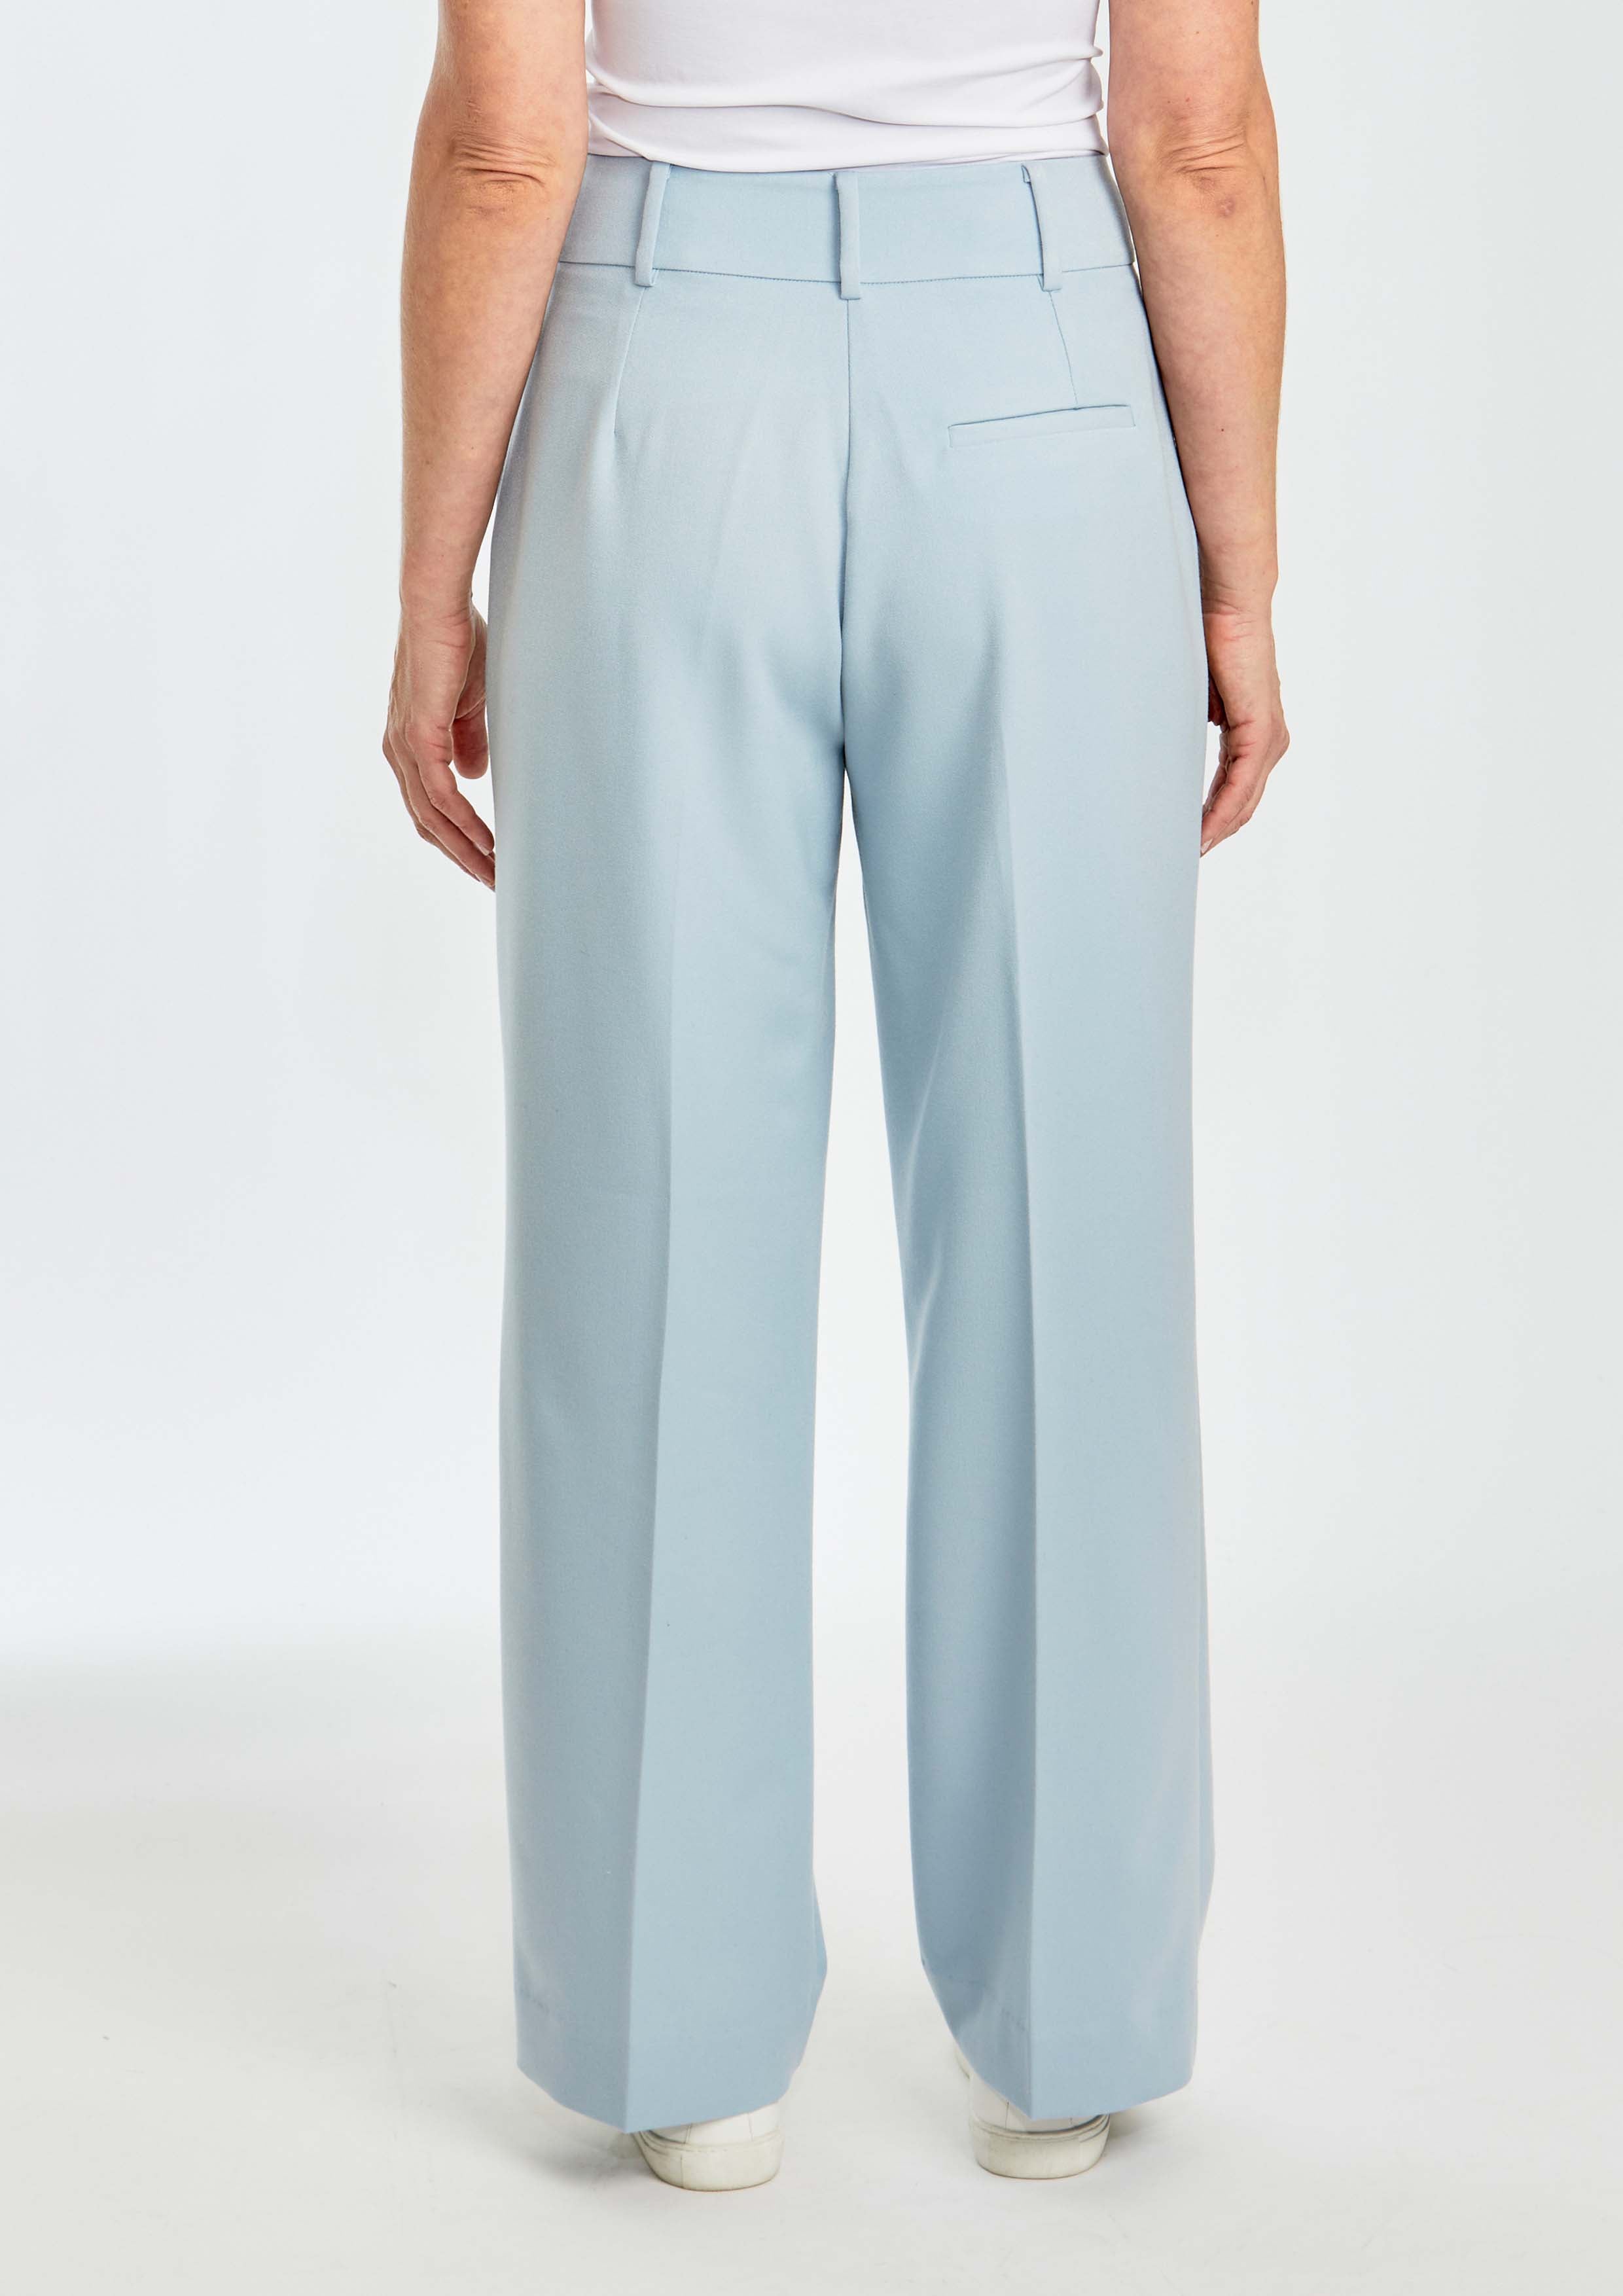 Ping Pong City Trouser - Baby Blue